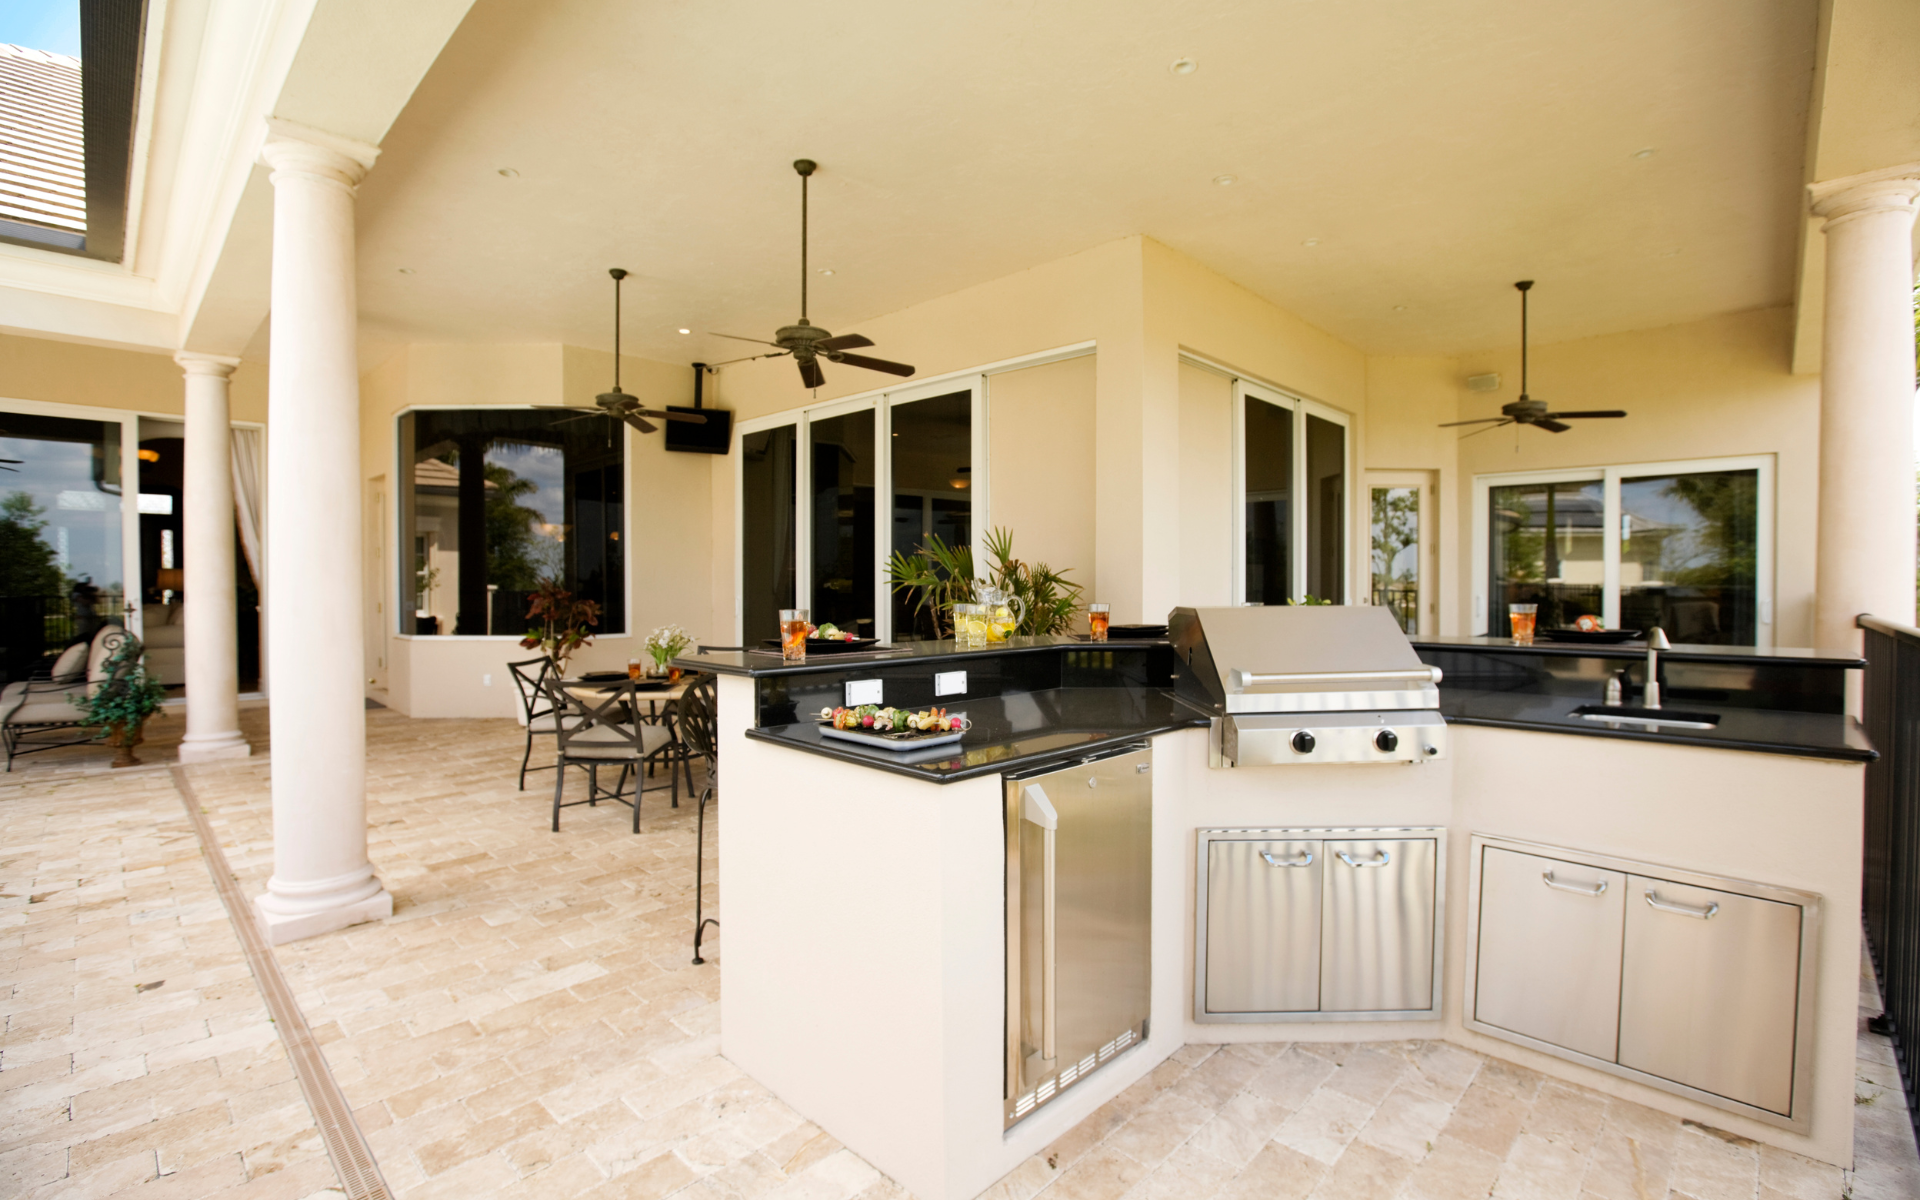 Elegant outdoor kitchen style with beige paint